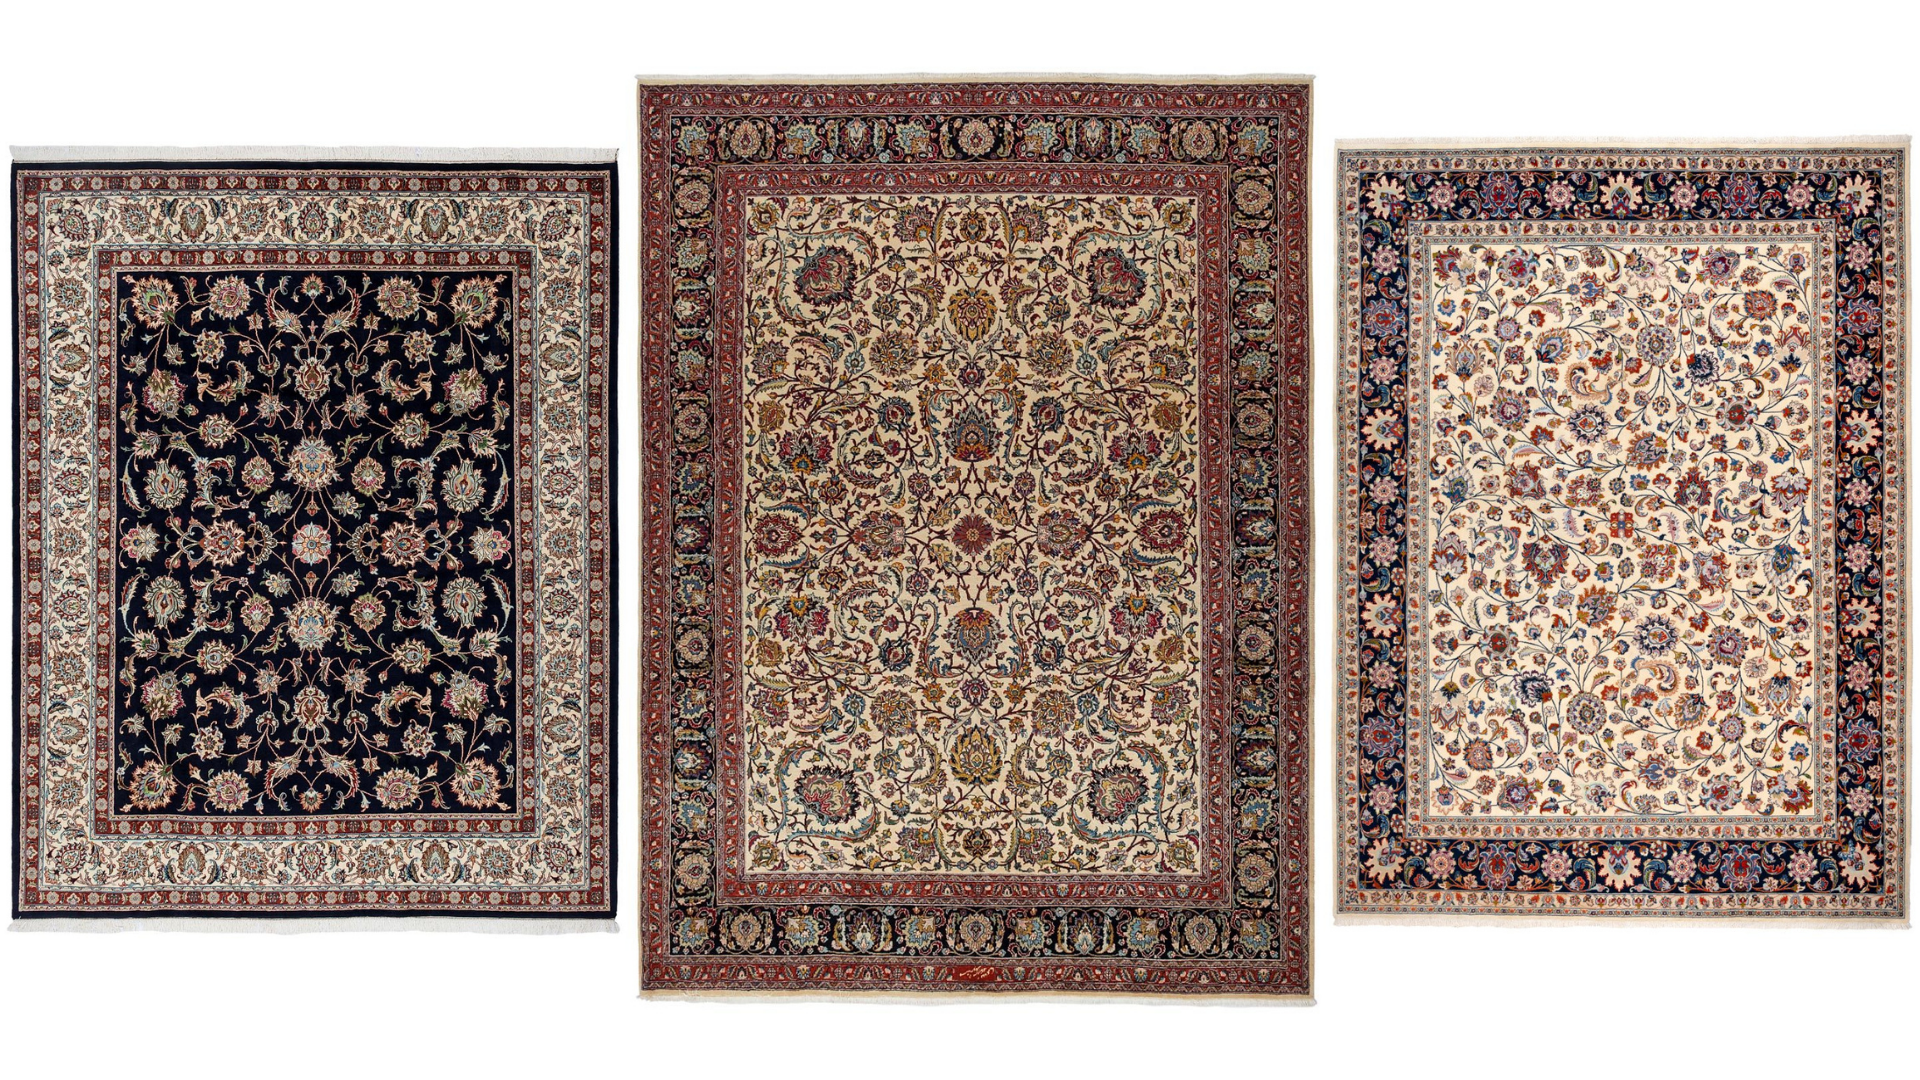 persian rugs, oriental rugs, home decor, home accessories, interior decor, interior design, london rugs, uk rugs, rug collections, rug guide, rug encyclopedia